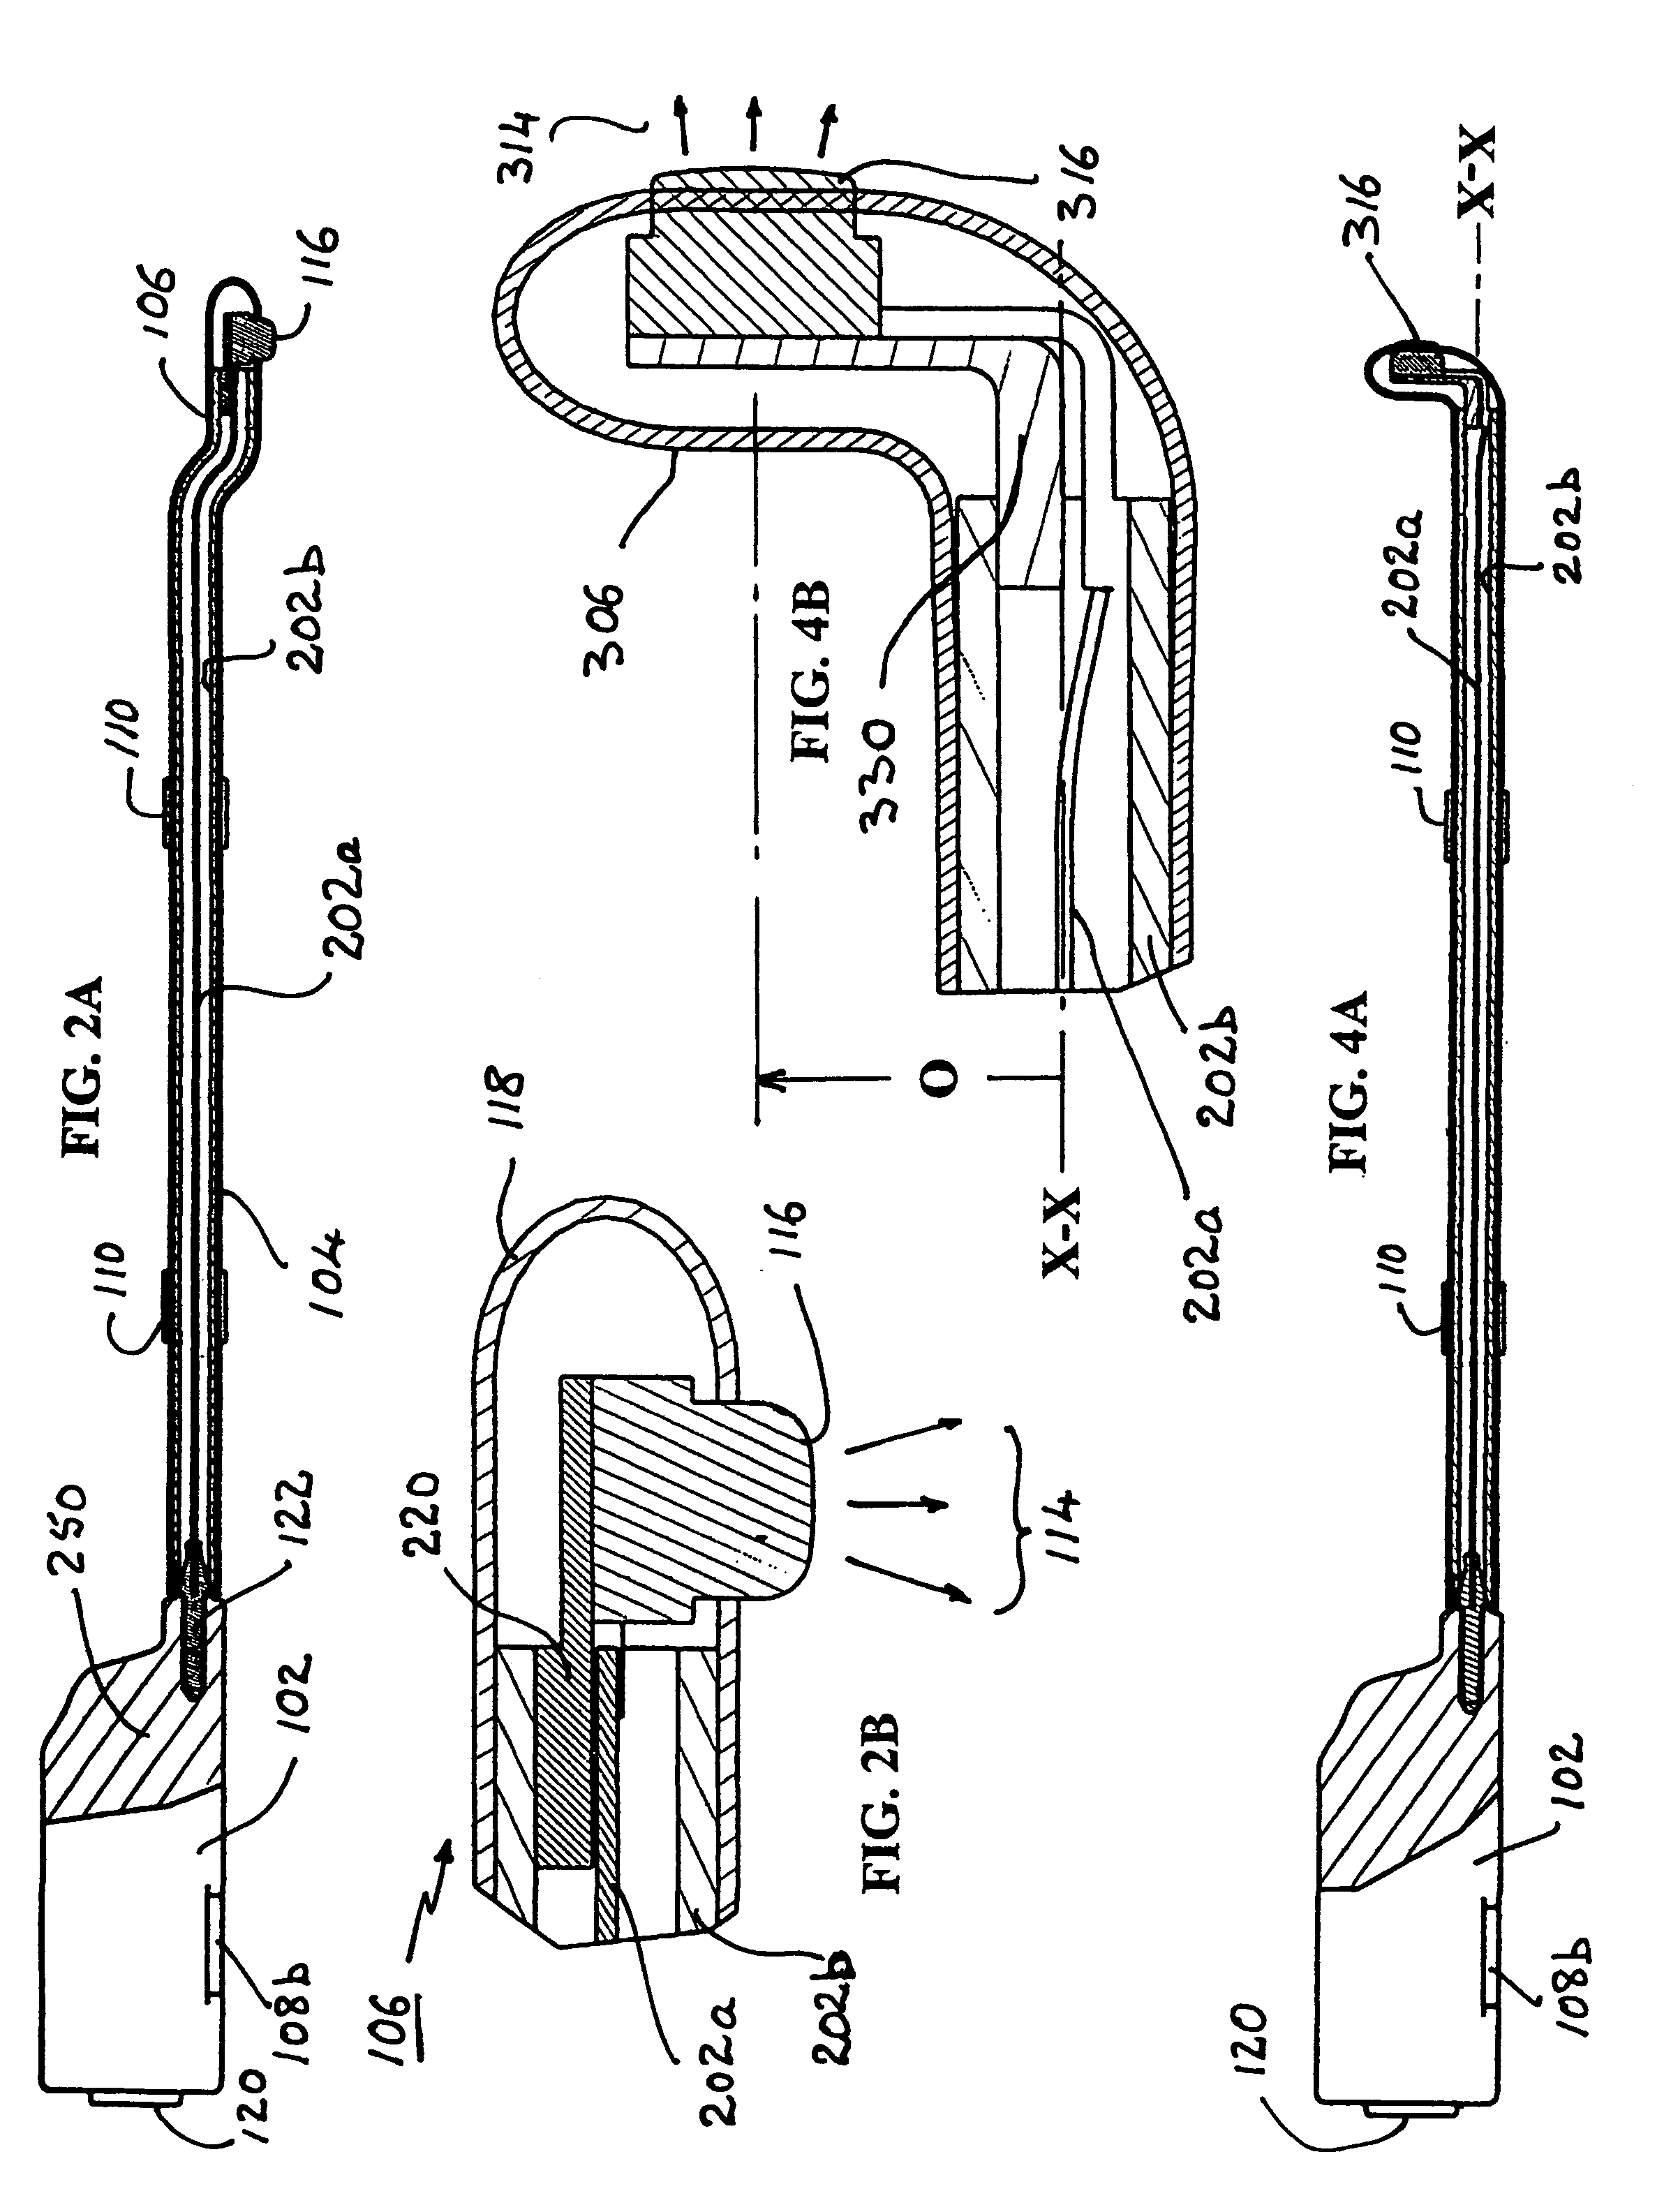 Compact lighting system attachable to a surgical tool and method of use thereof